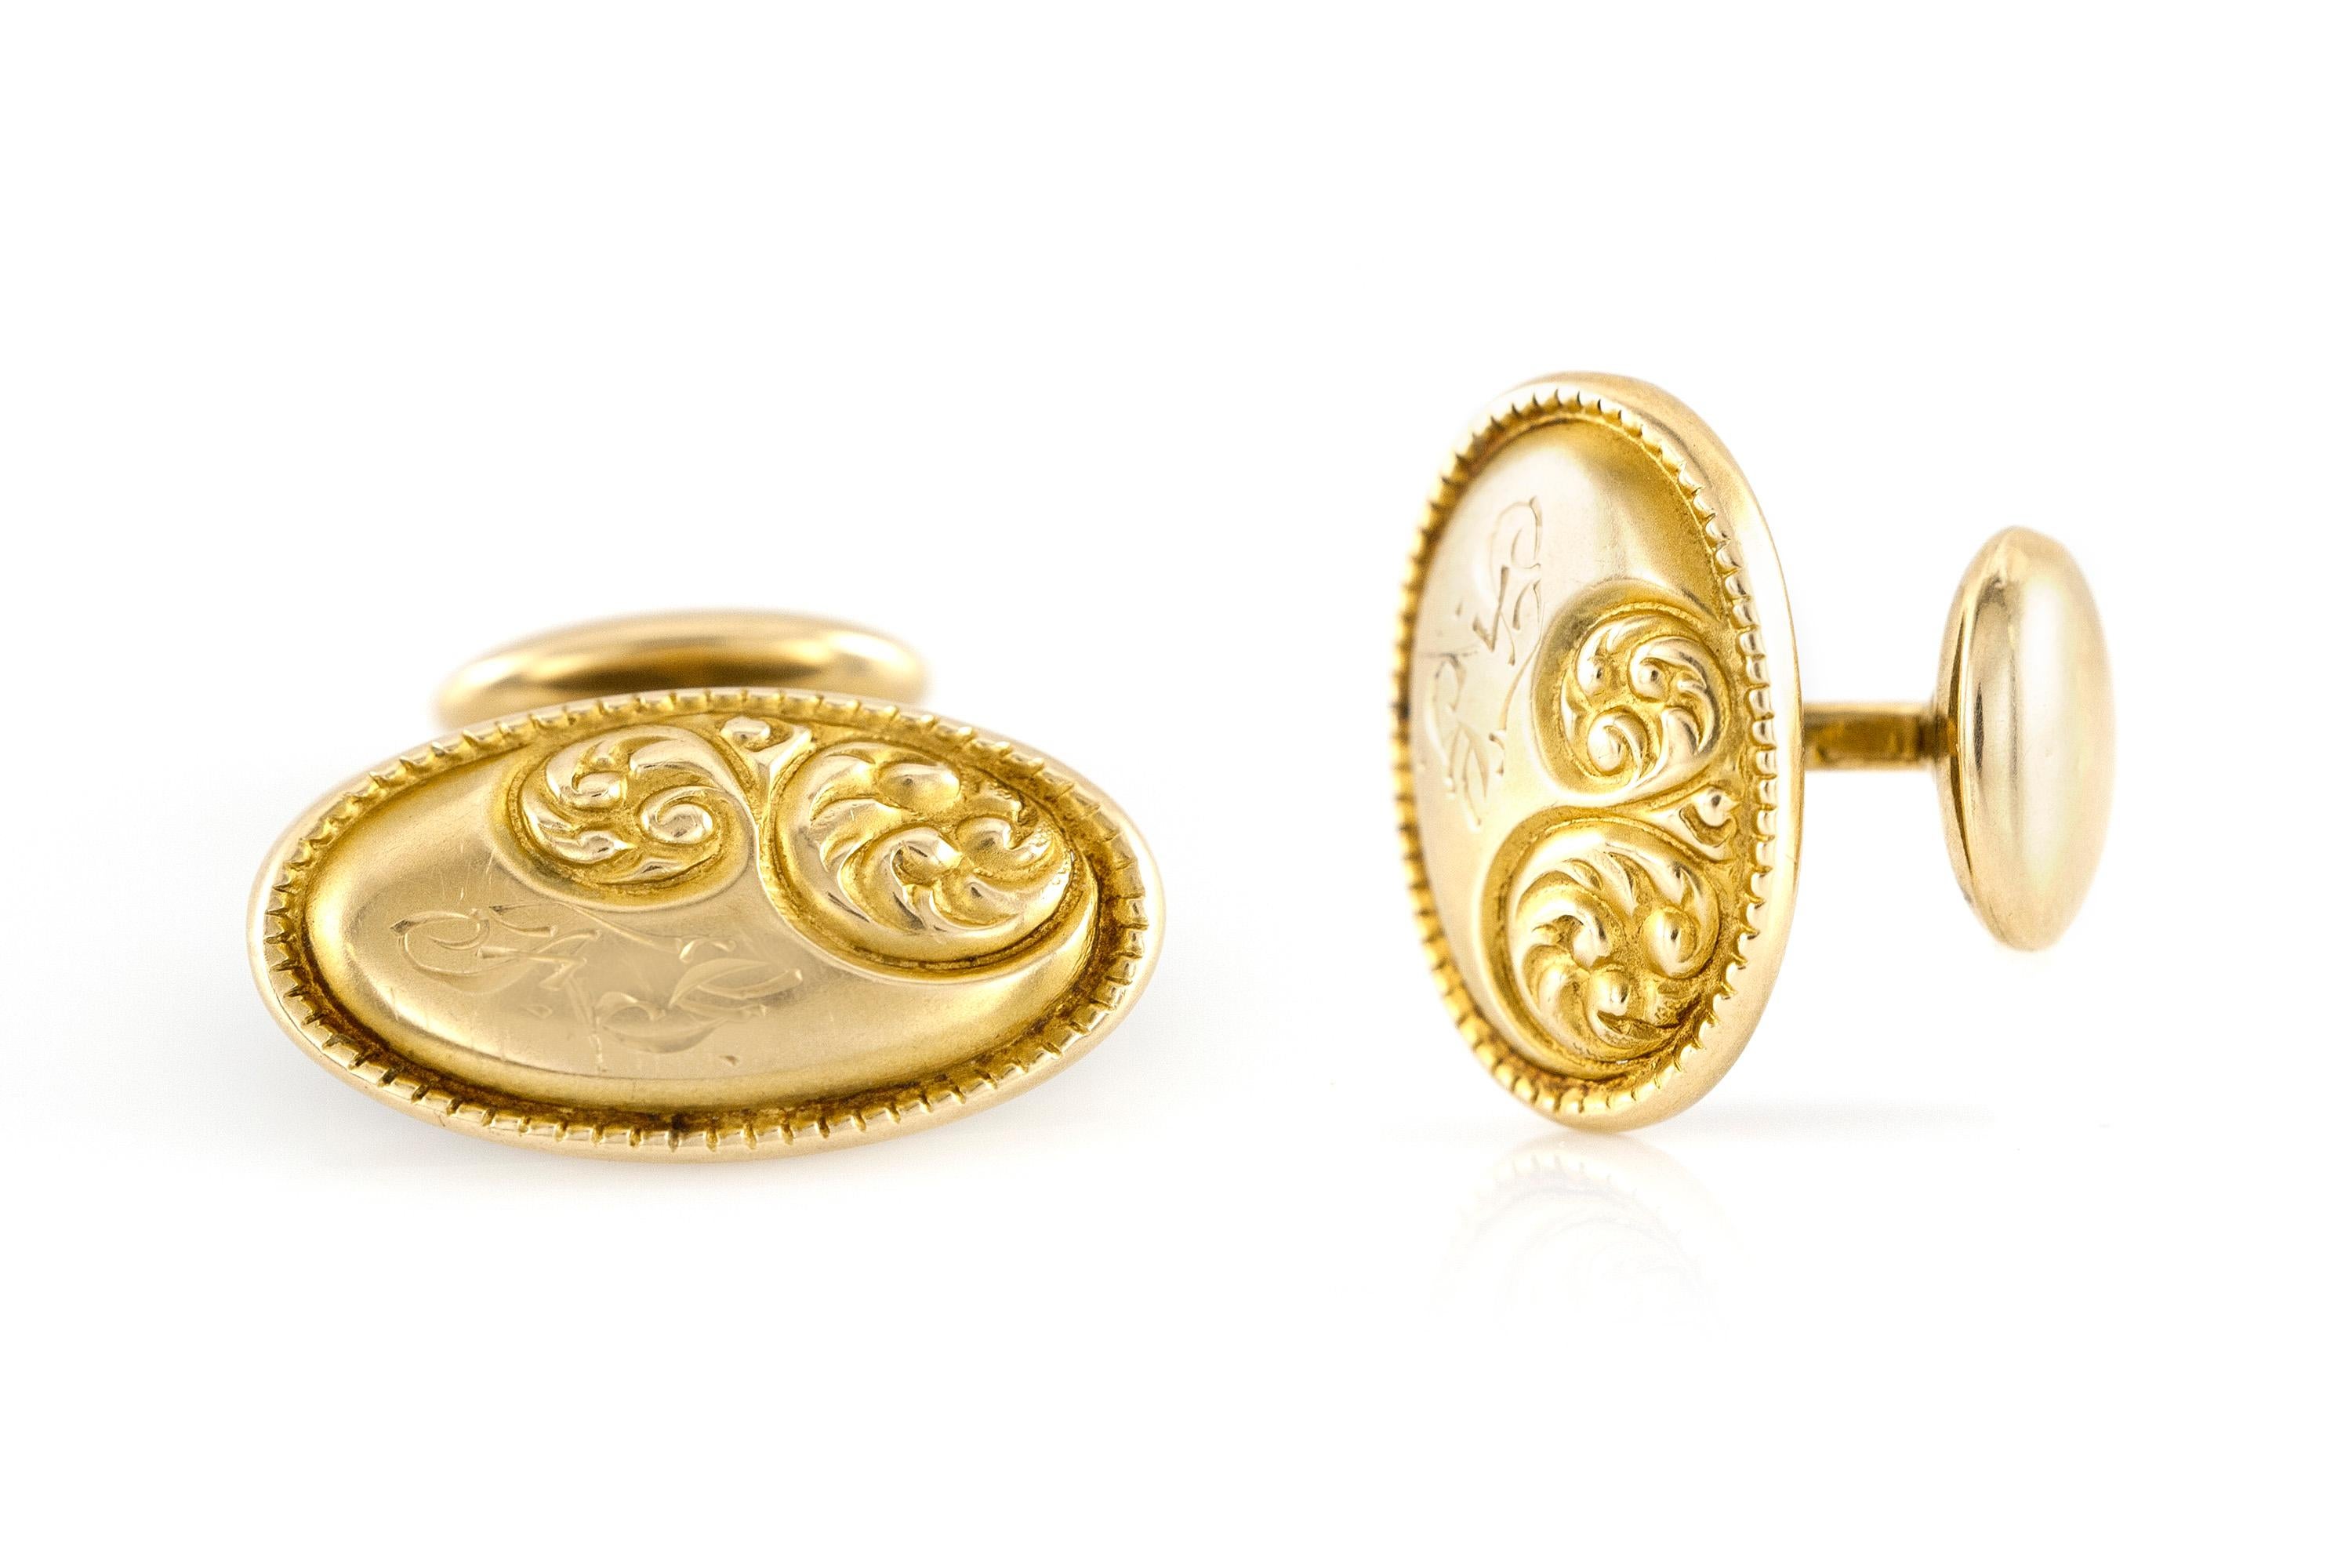 Cufflinks finely crafted in 14k yellow gold, weighing 2.5 dwt., size of each cufflink is 0.50 inch. Circa 1920.

